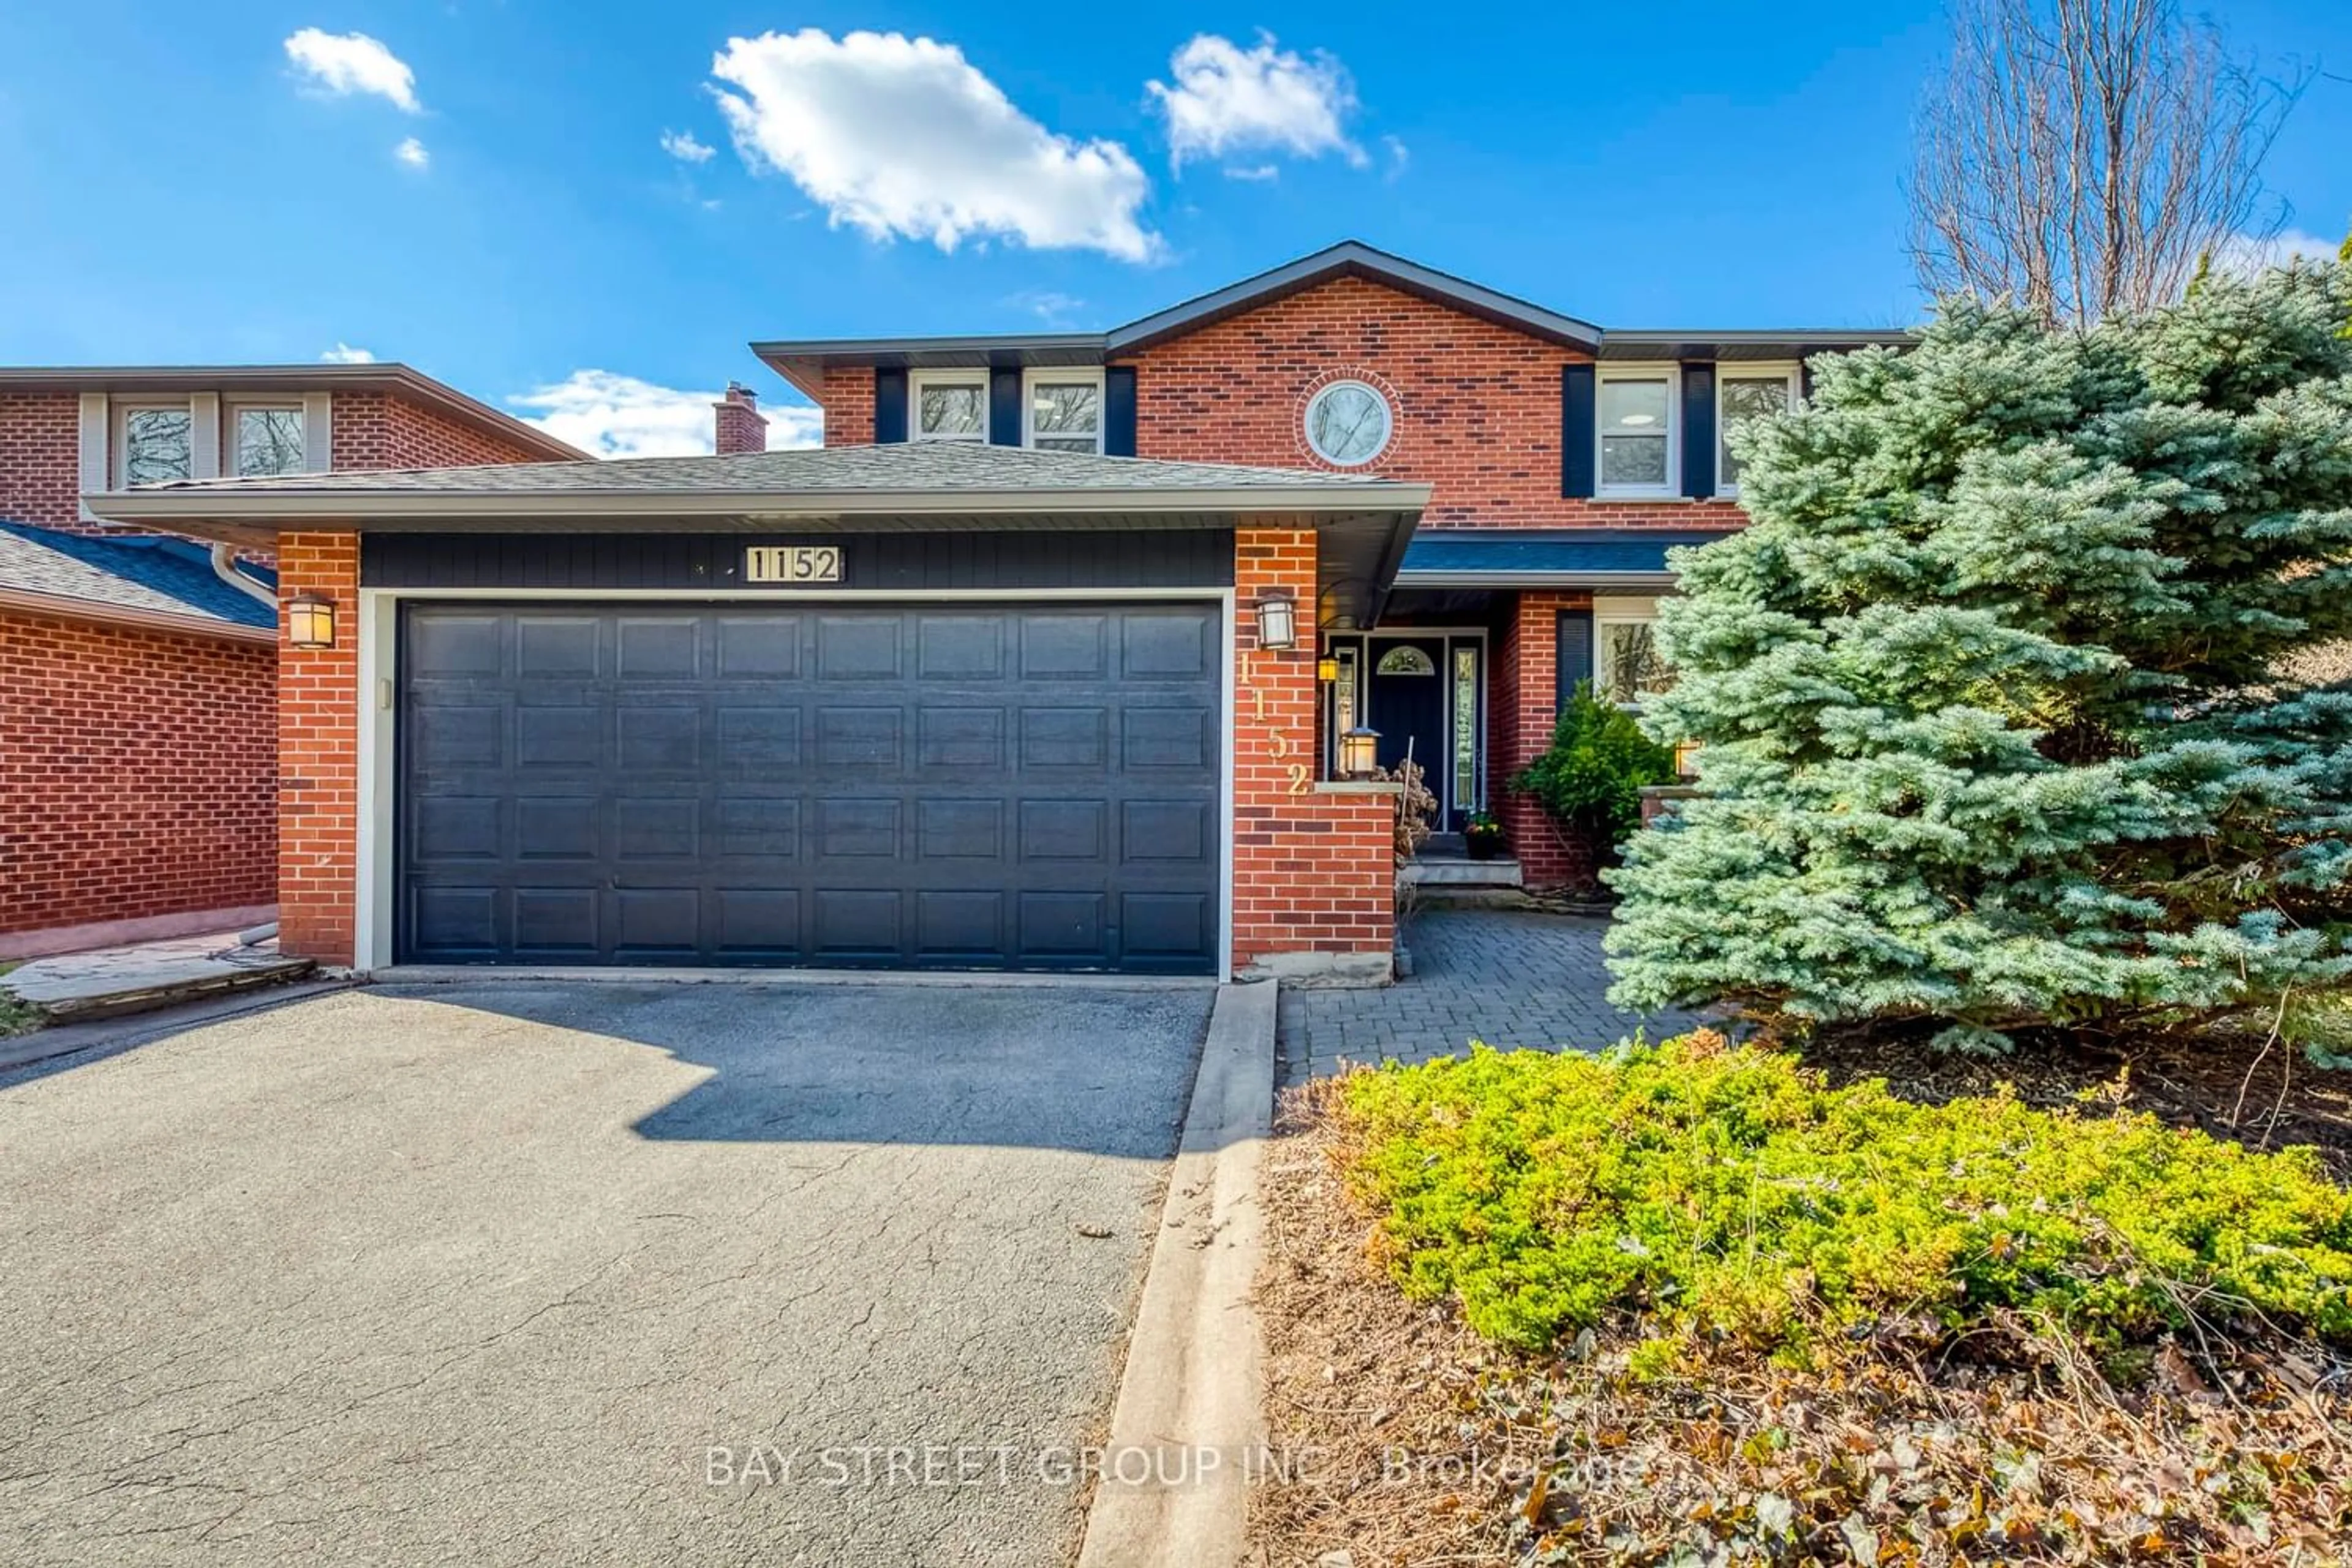 Home with brick exterior material for 1152 Montrose Abbey Dr, Oakville Ontario L6M 1E5